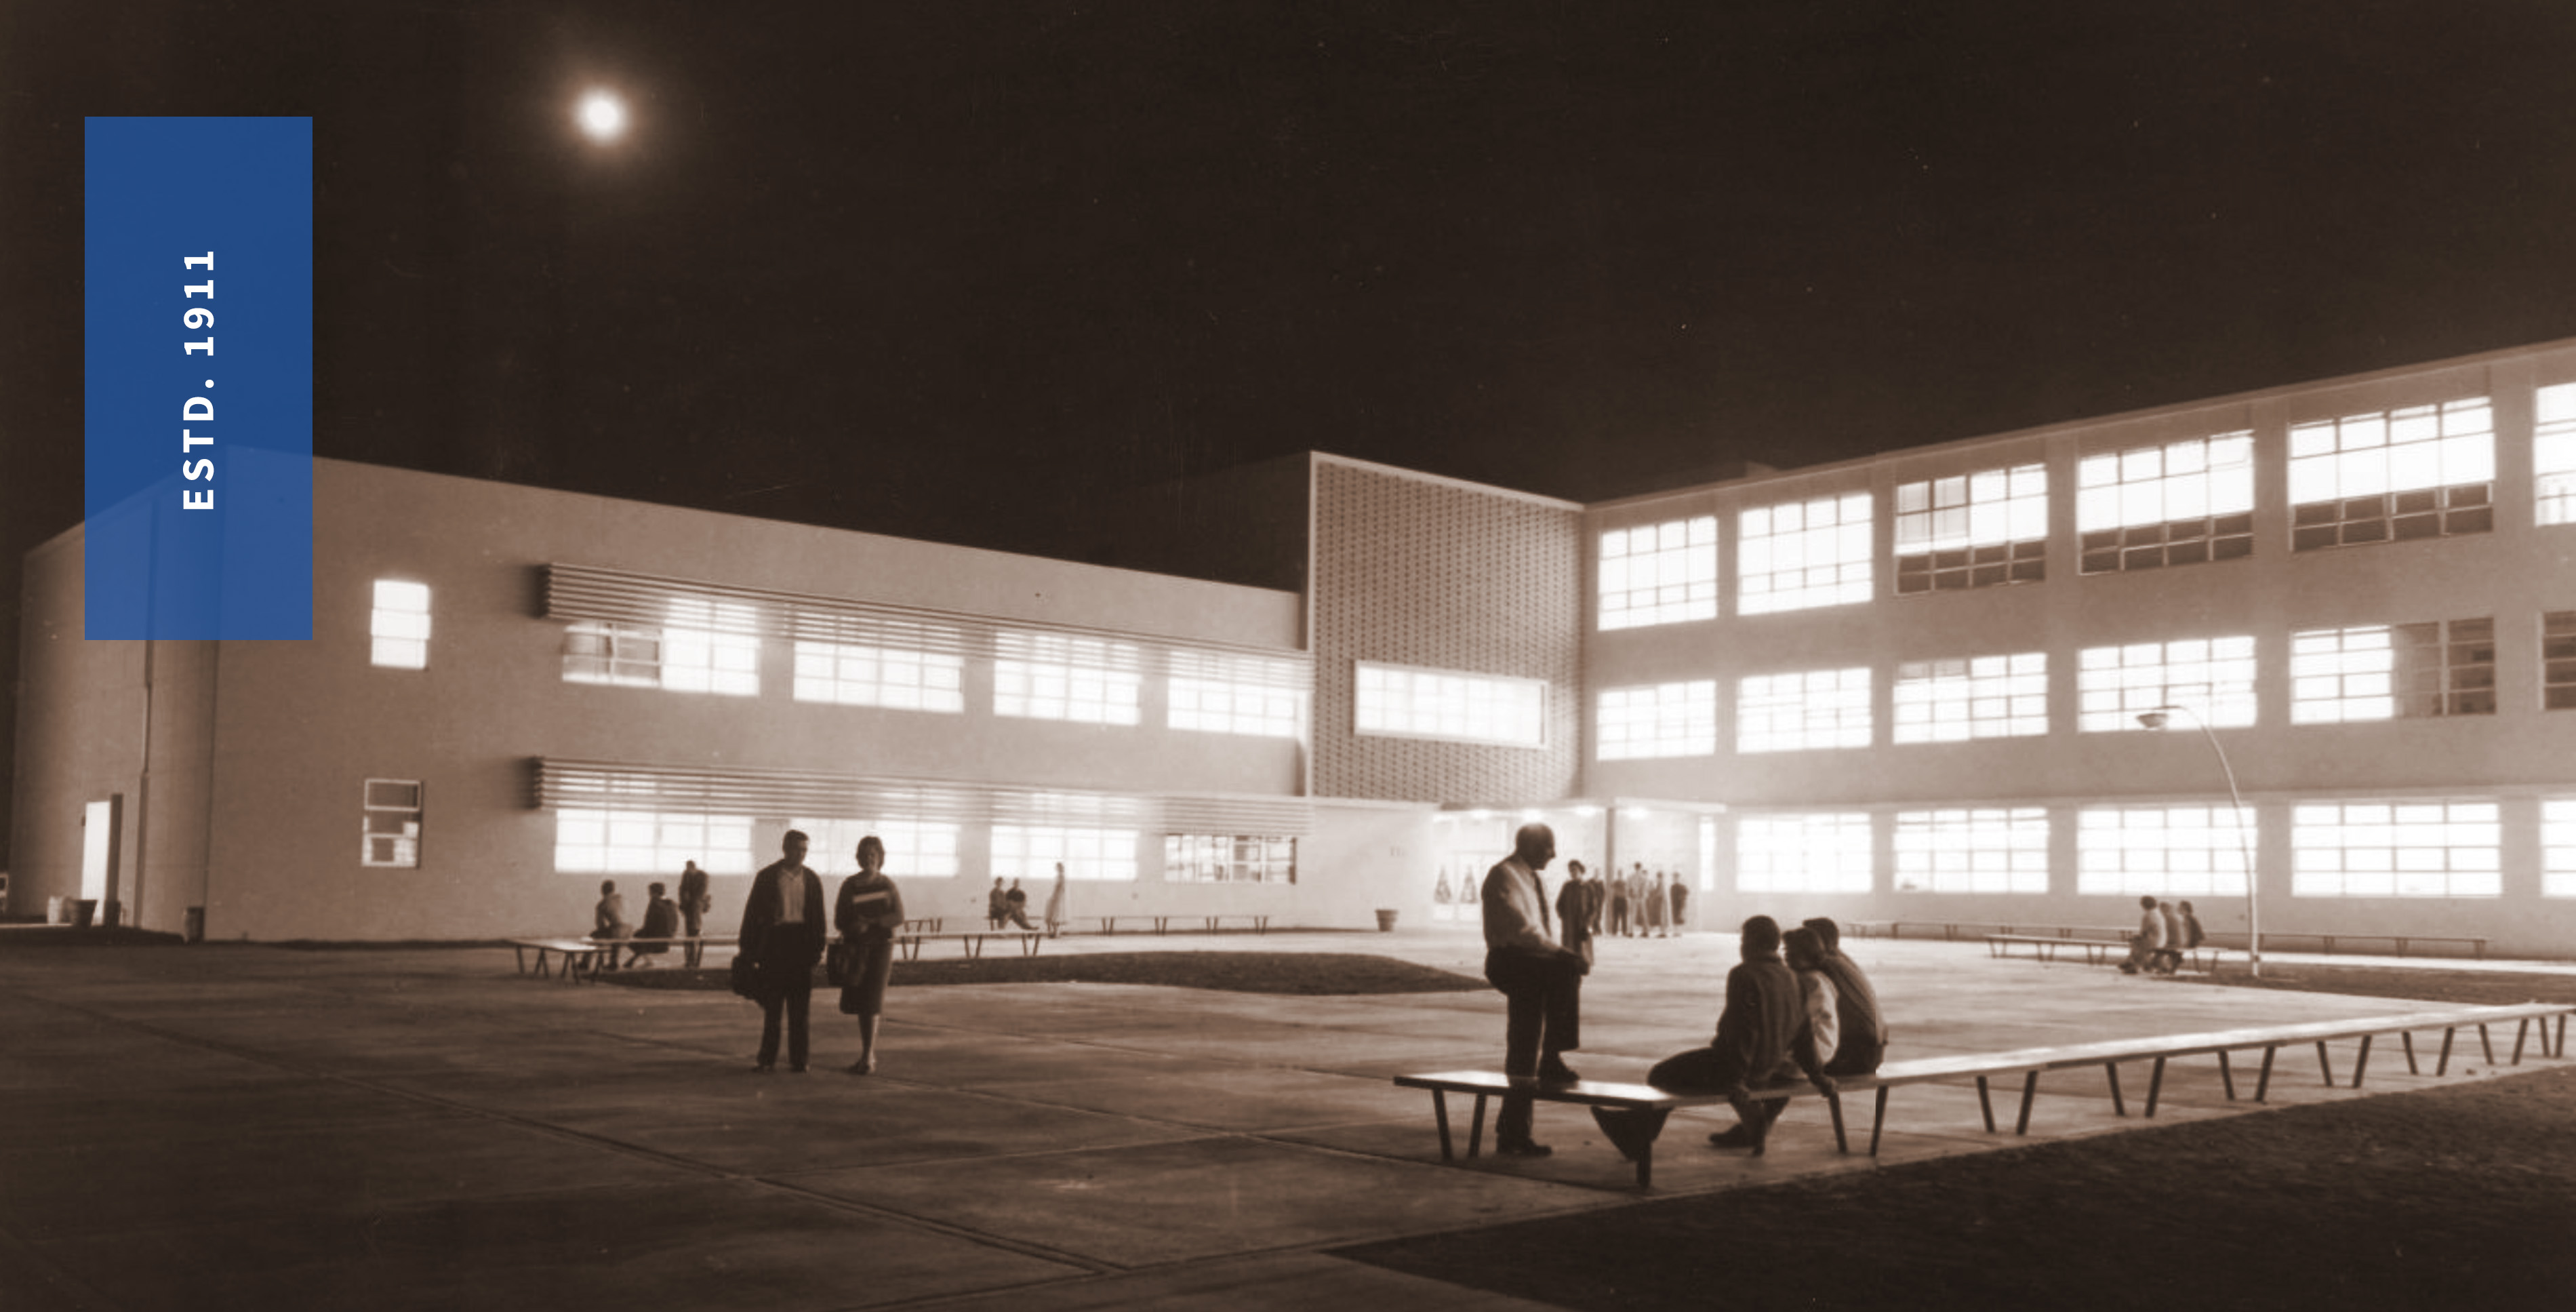 Old photo of Art Building